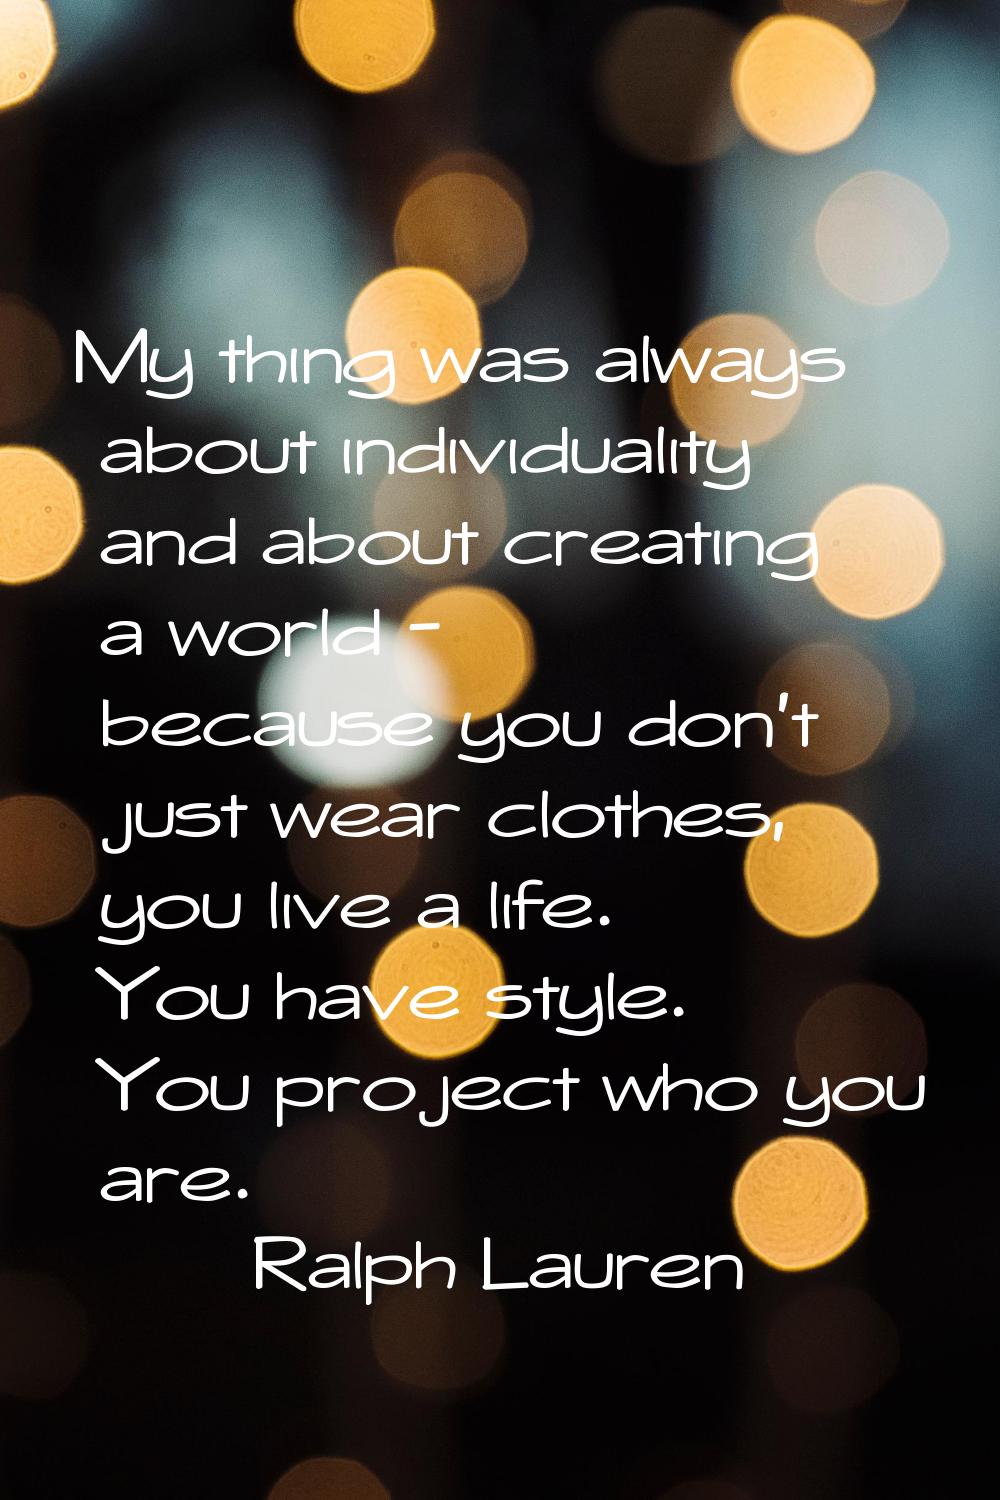 My thing was always about individuality and about creating a world - because you don't just wear cl